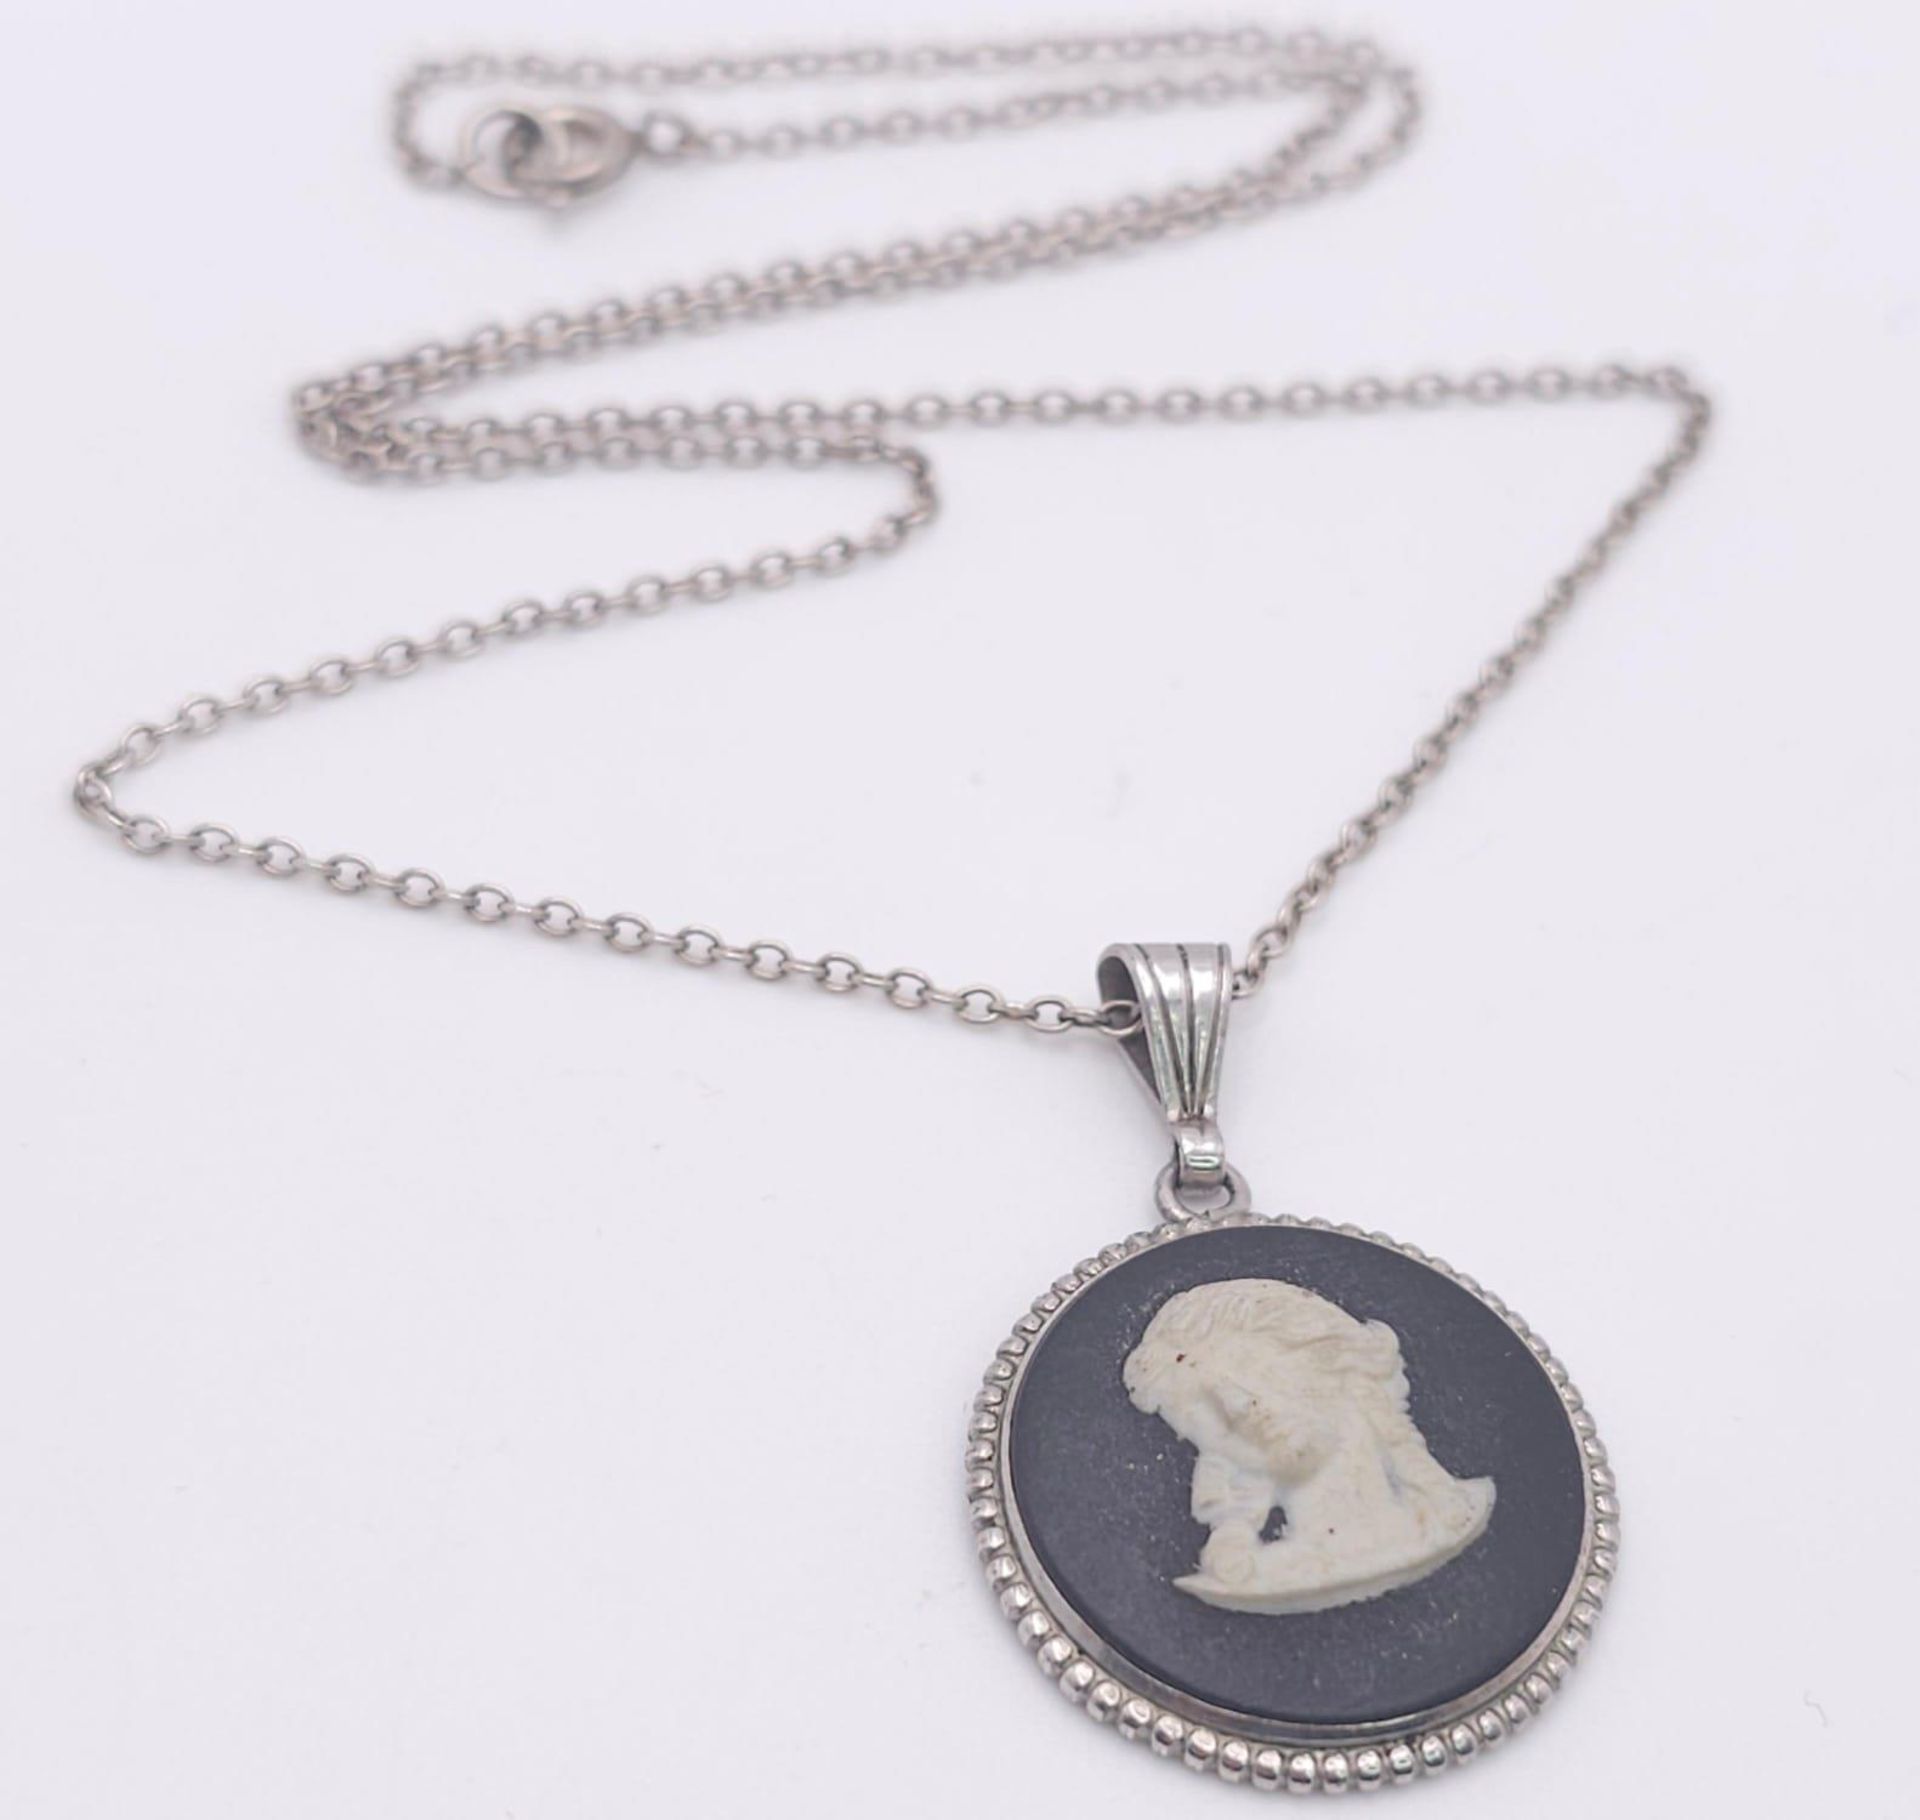 A sterling silver Cameo pendant on silver belcher chain. Total weight 5.3G. Total length 43cm.